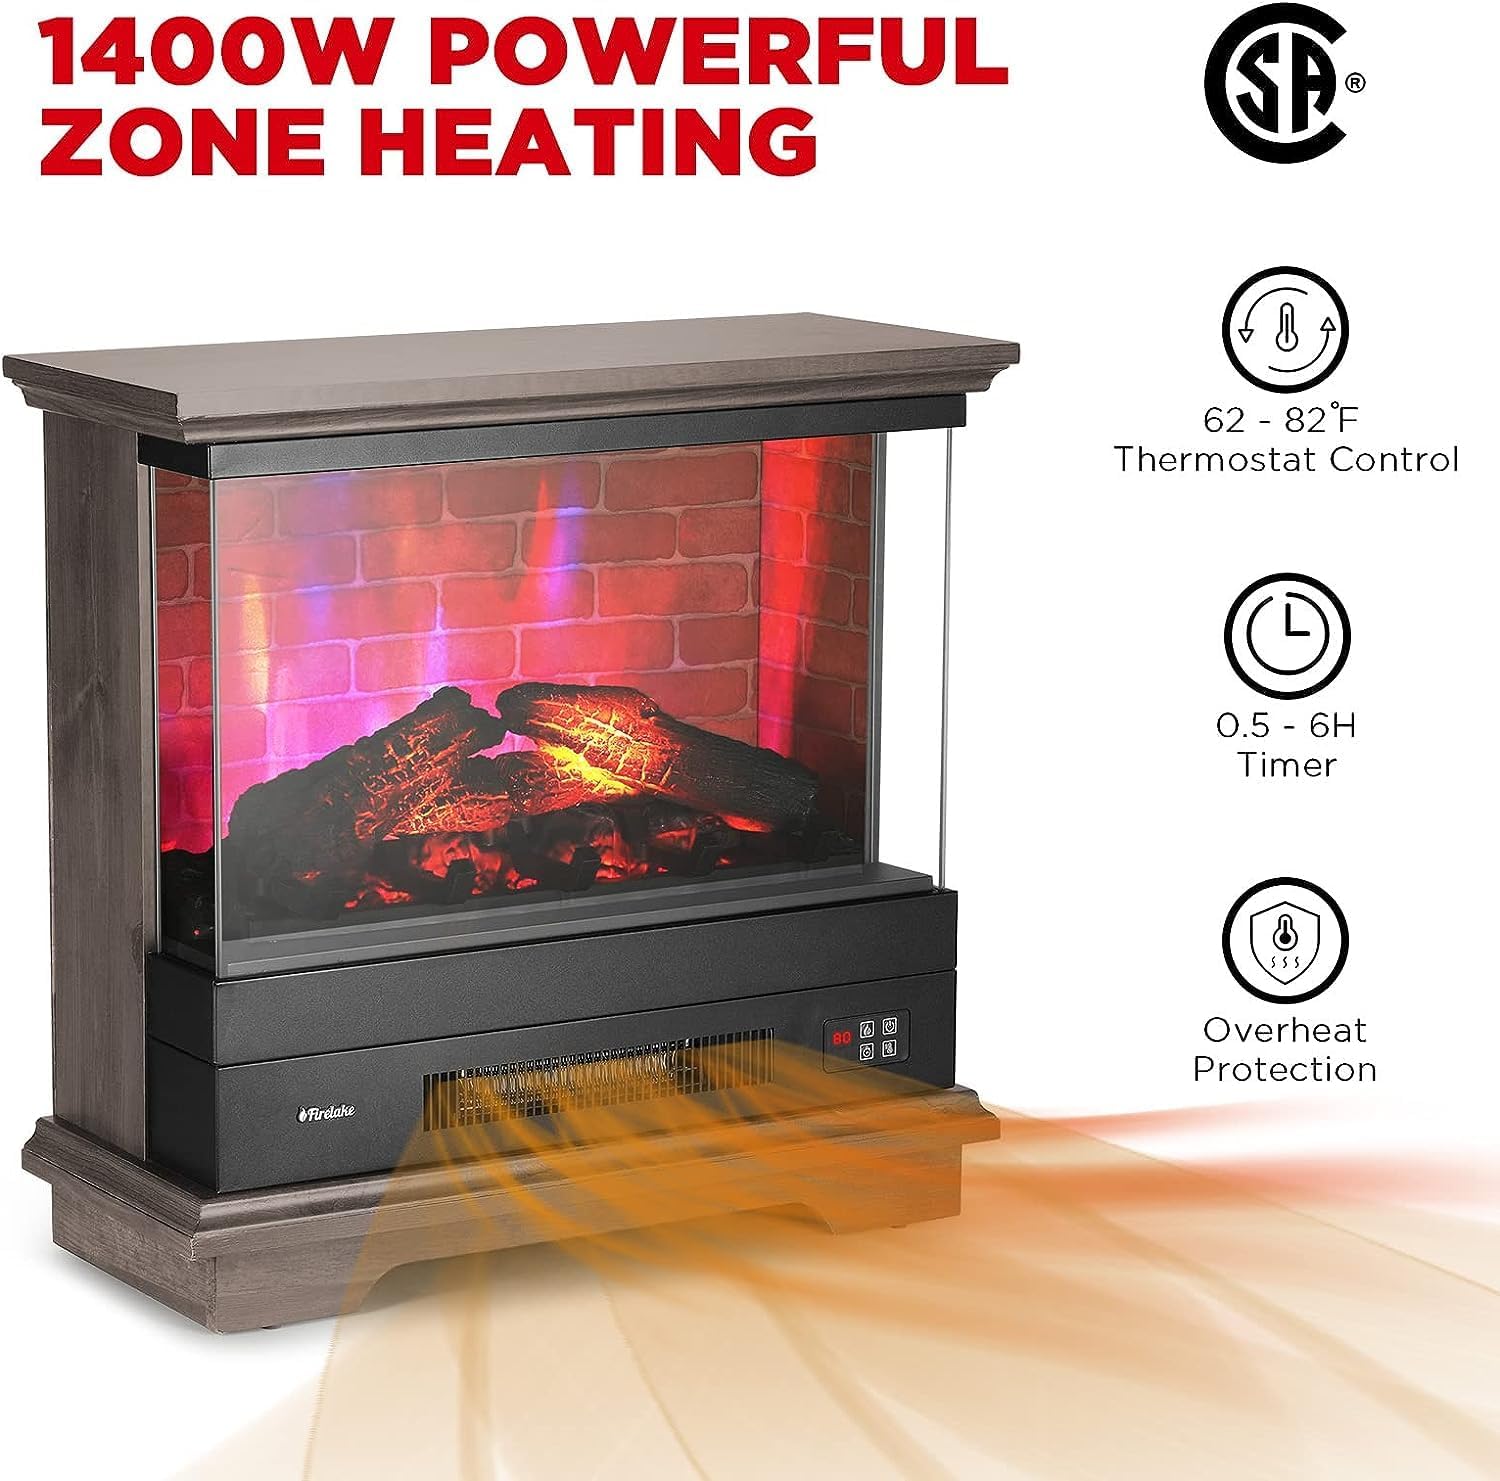 TURBRO Firelake 27 in. WiFi Electric Fireplace Heater with Sound Crackling - Freestanding Fireplace with Mantel